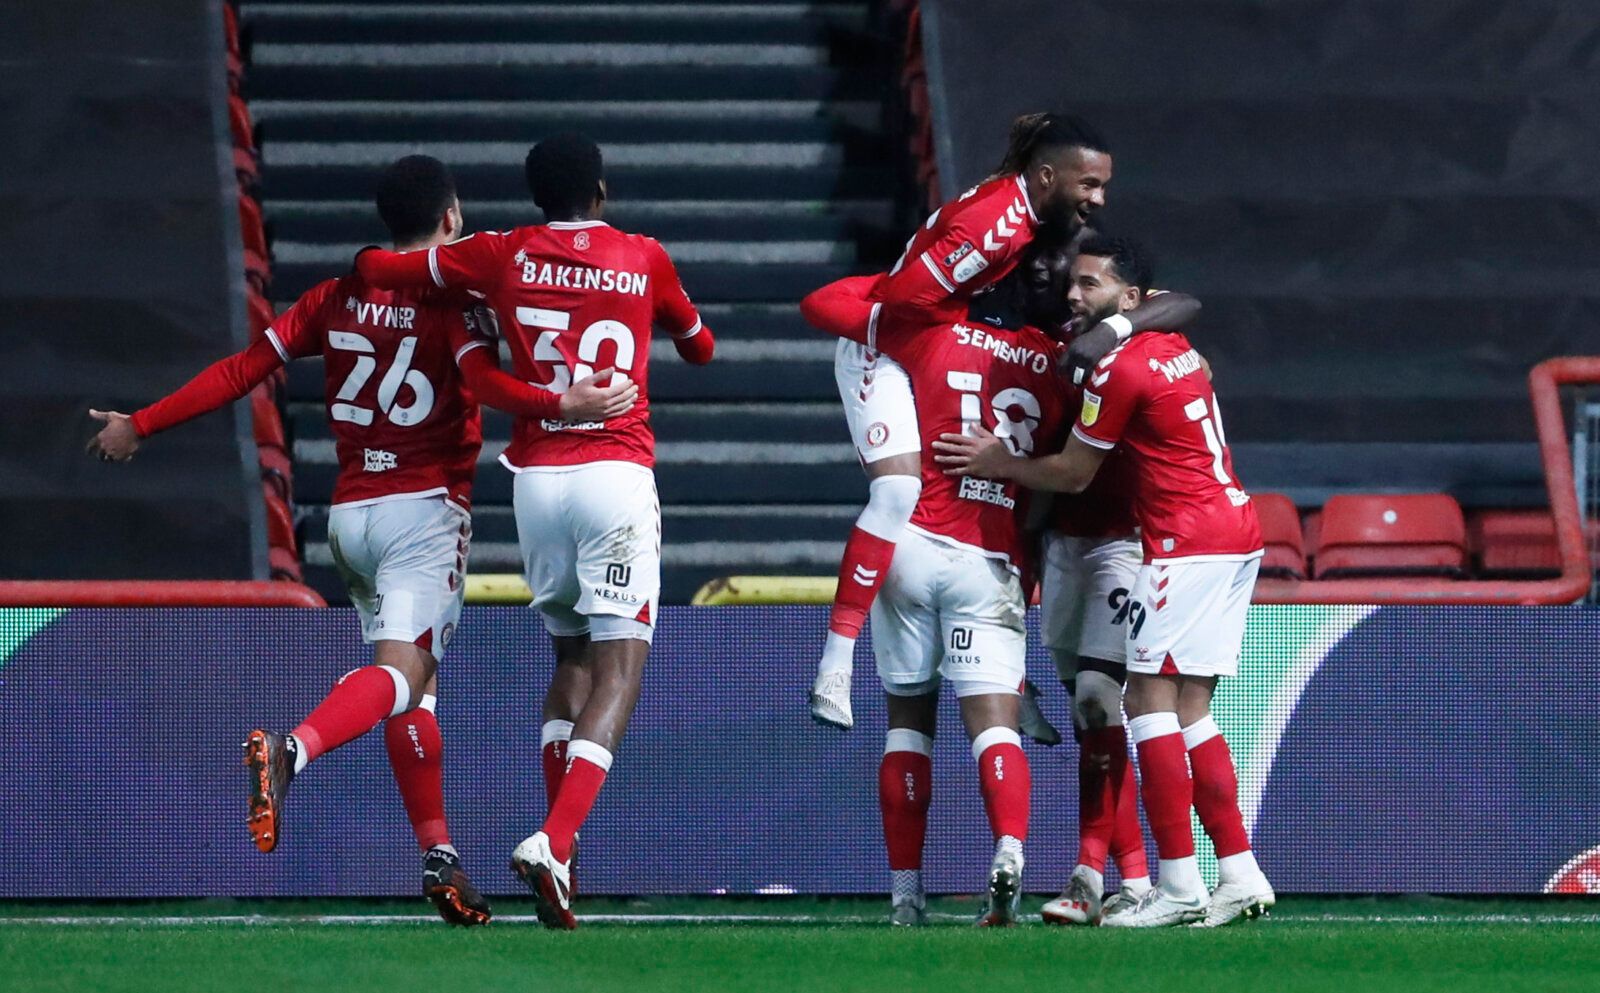 Soccer Football - Championship - Bristol City v Huddersfield Town - Ashton Gate Stadium, Bristol, Britain - January 26, 2021 Bristol City's Famara Diedhiou celebrates scoring their second goal with teammates Action Images/Matthew Childs EDITORIAL USE ONLY. No use with unauthorized audio, video, data, fixture lists, club/league logos or 'live' services. Online in-match use limited to 75 images, no video emulation. No use in betting, games or single club /league/player publications.  Please contac